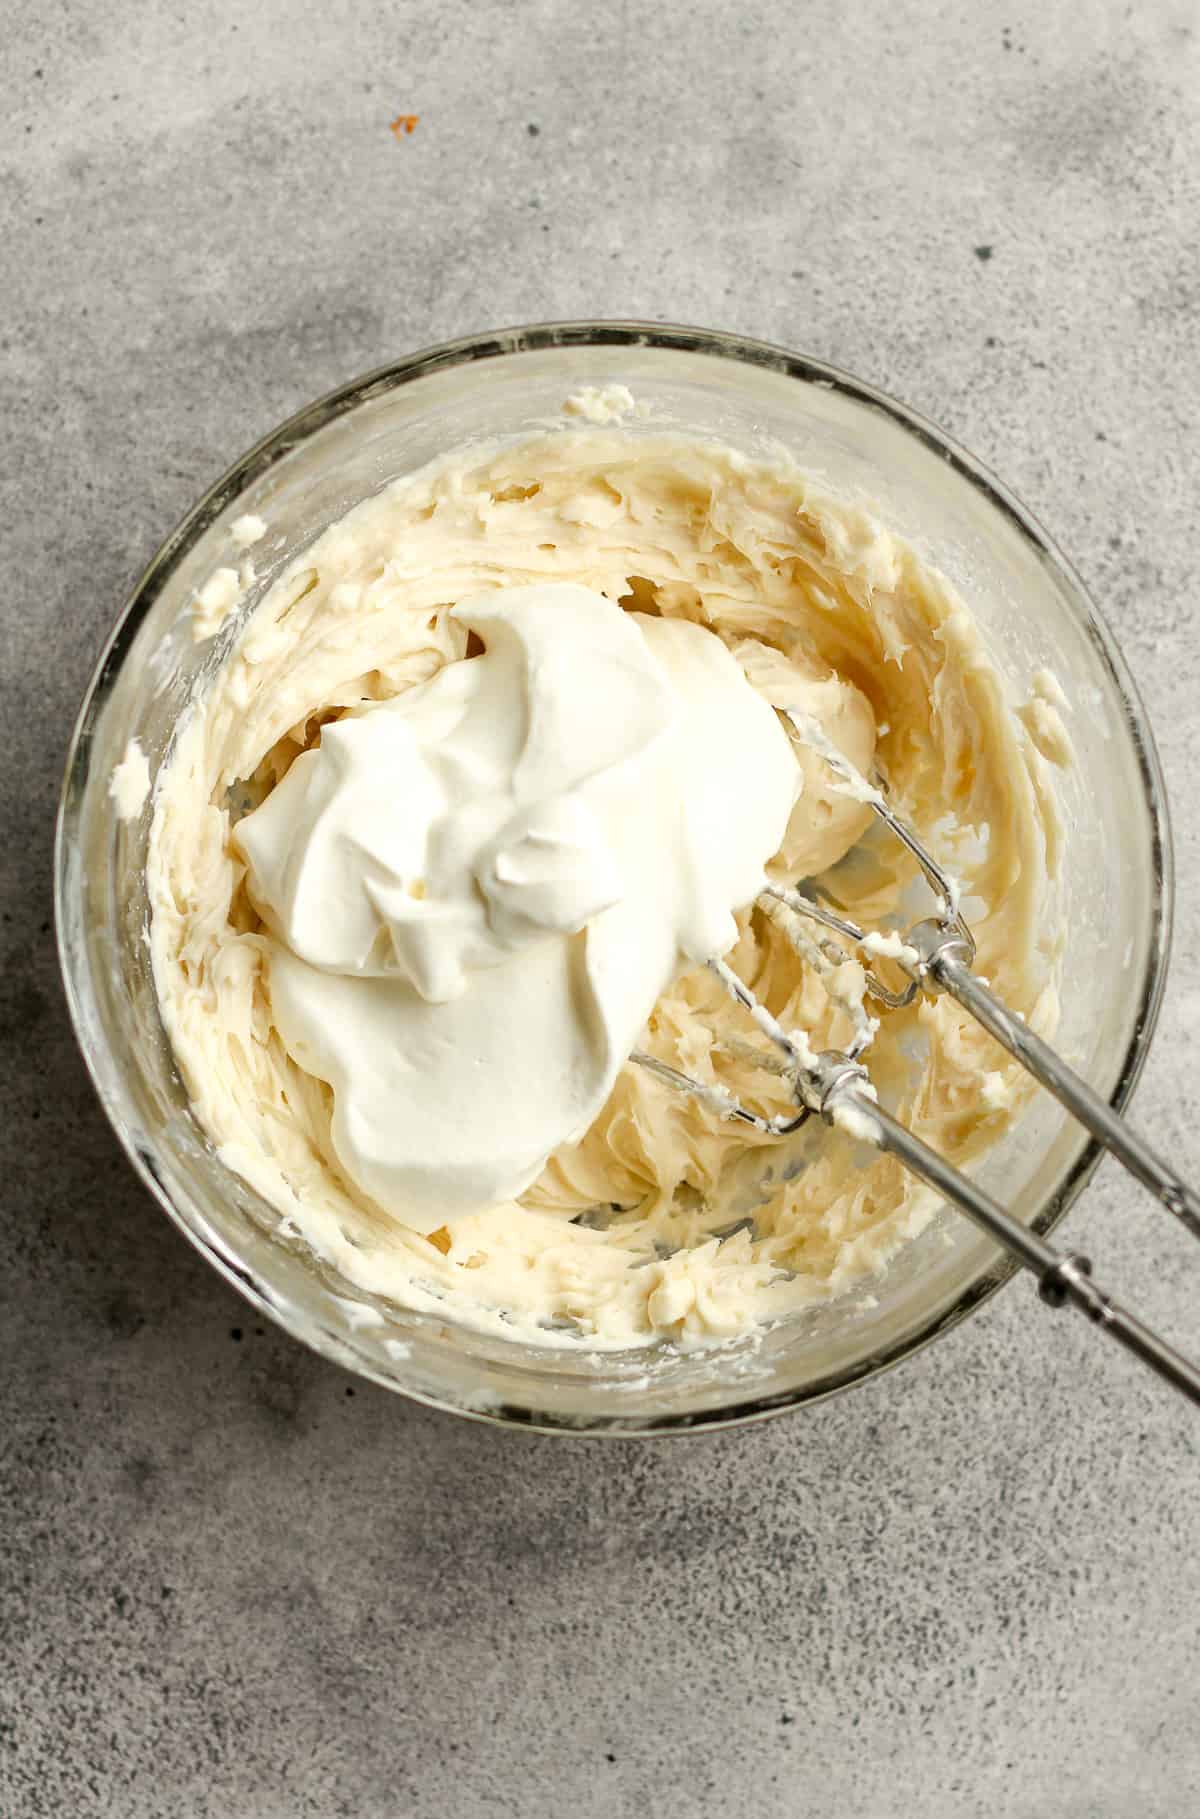 A bowl of the dip with the whipping cream on top.